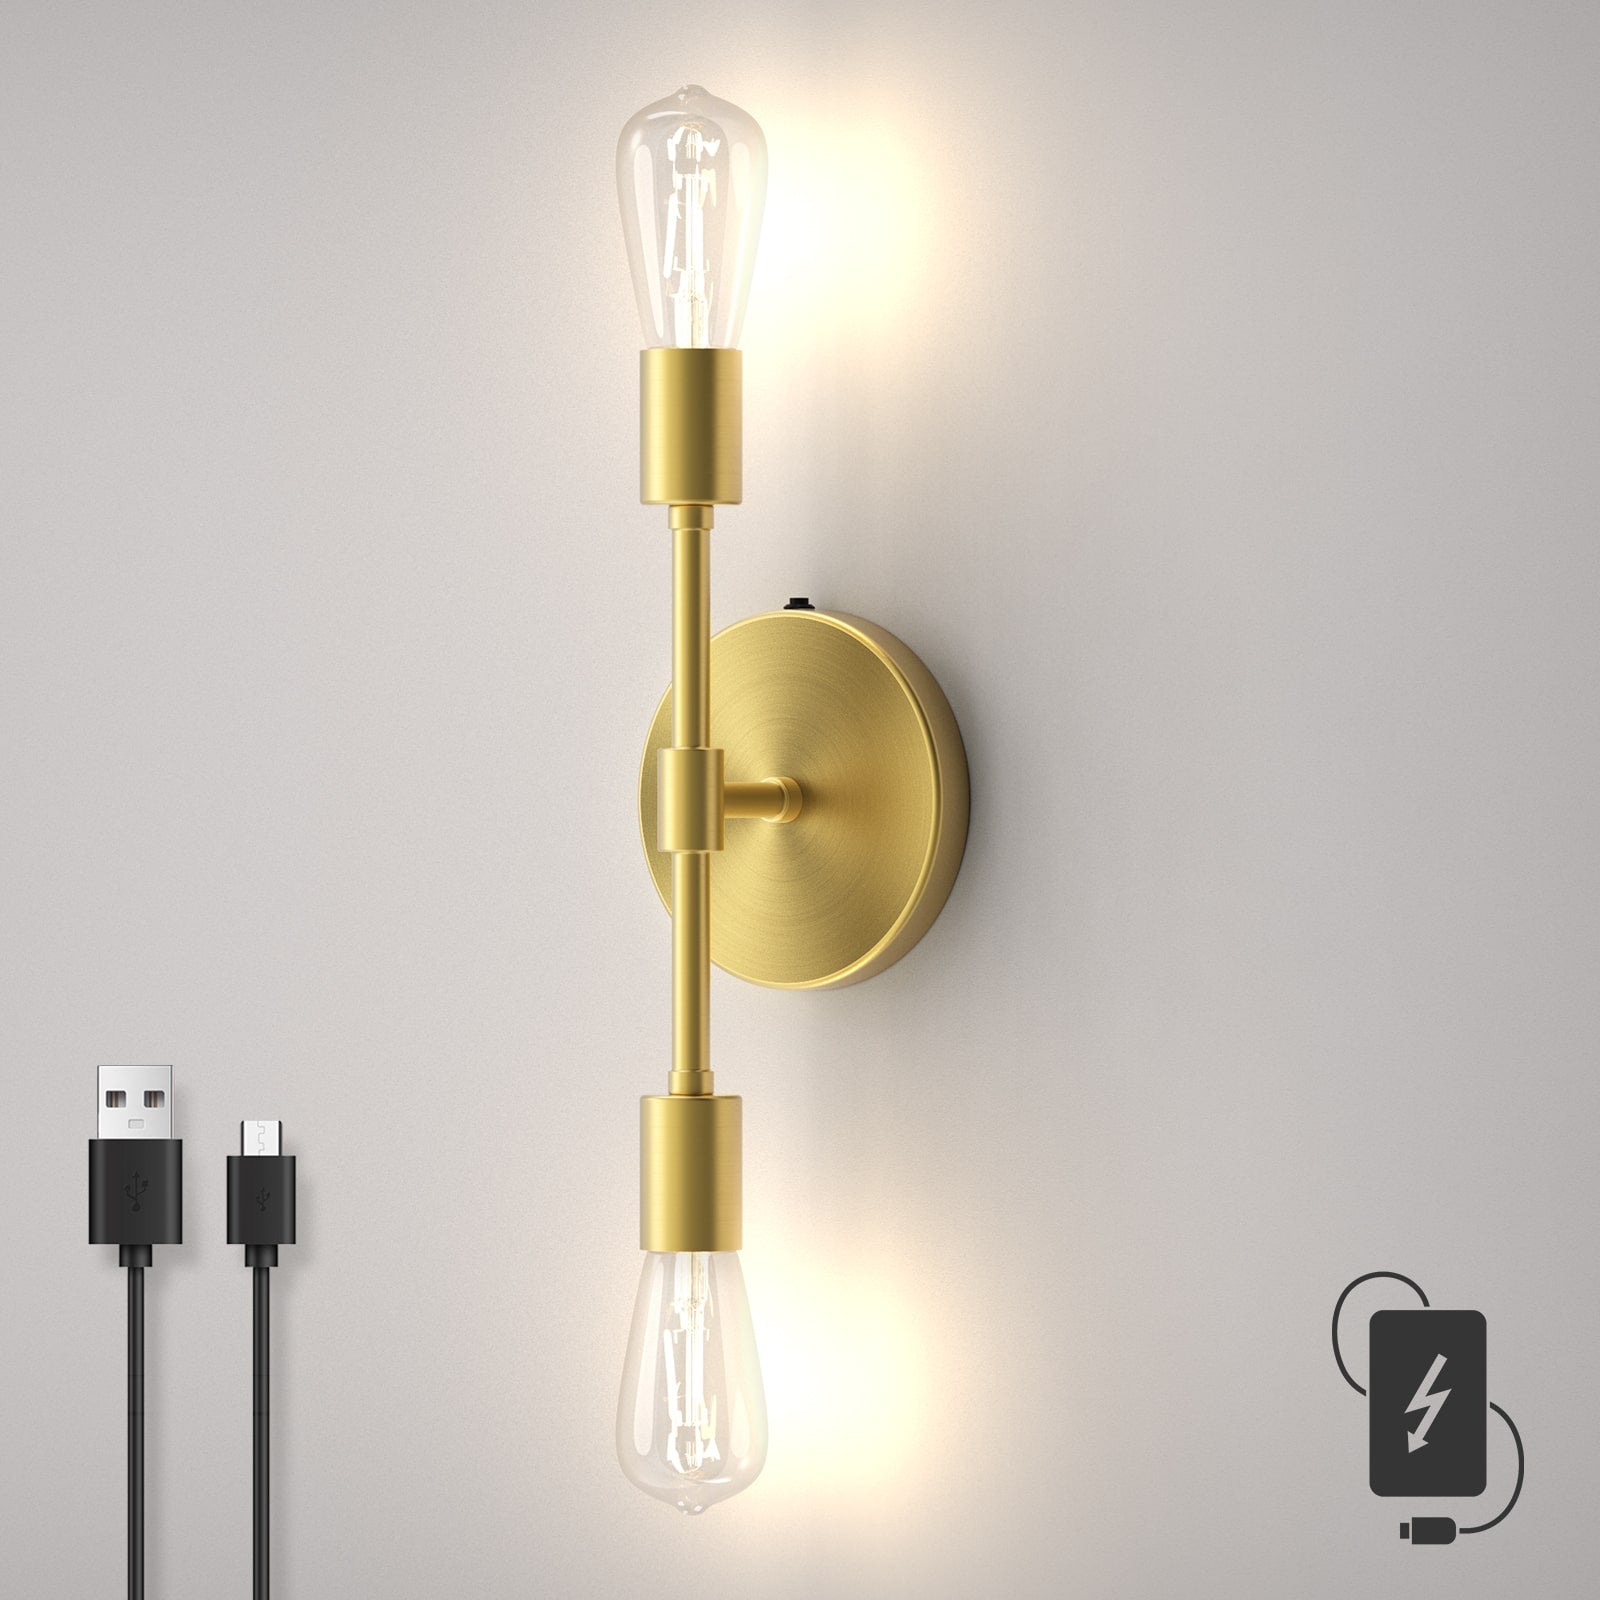 C05 2-Lights Wireless Battery Operated Wall Lamp for Hallway